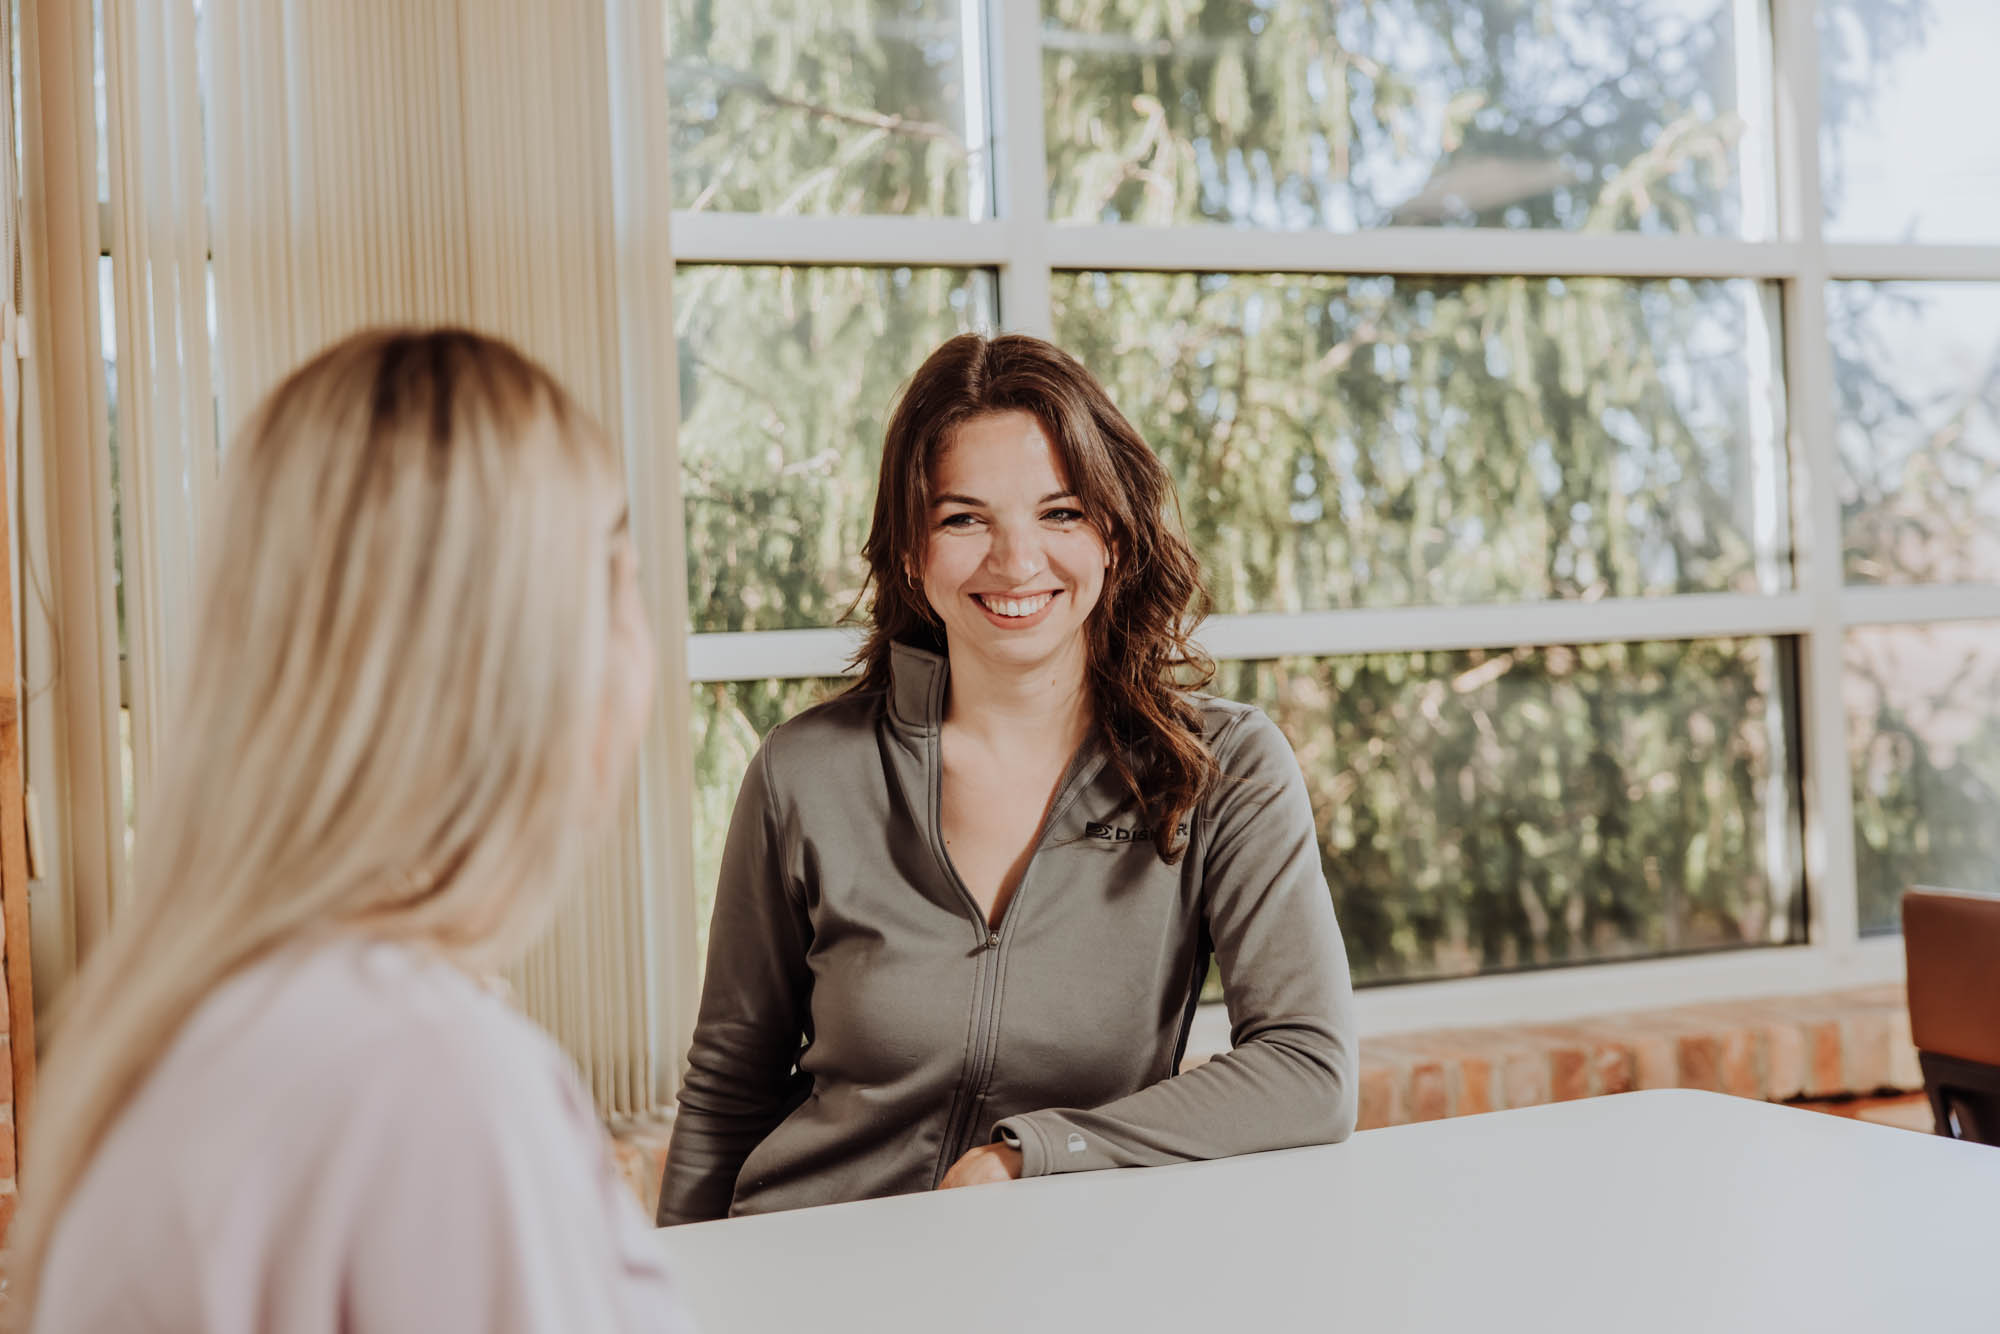 A recruiter sits at a table smiling at another woman